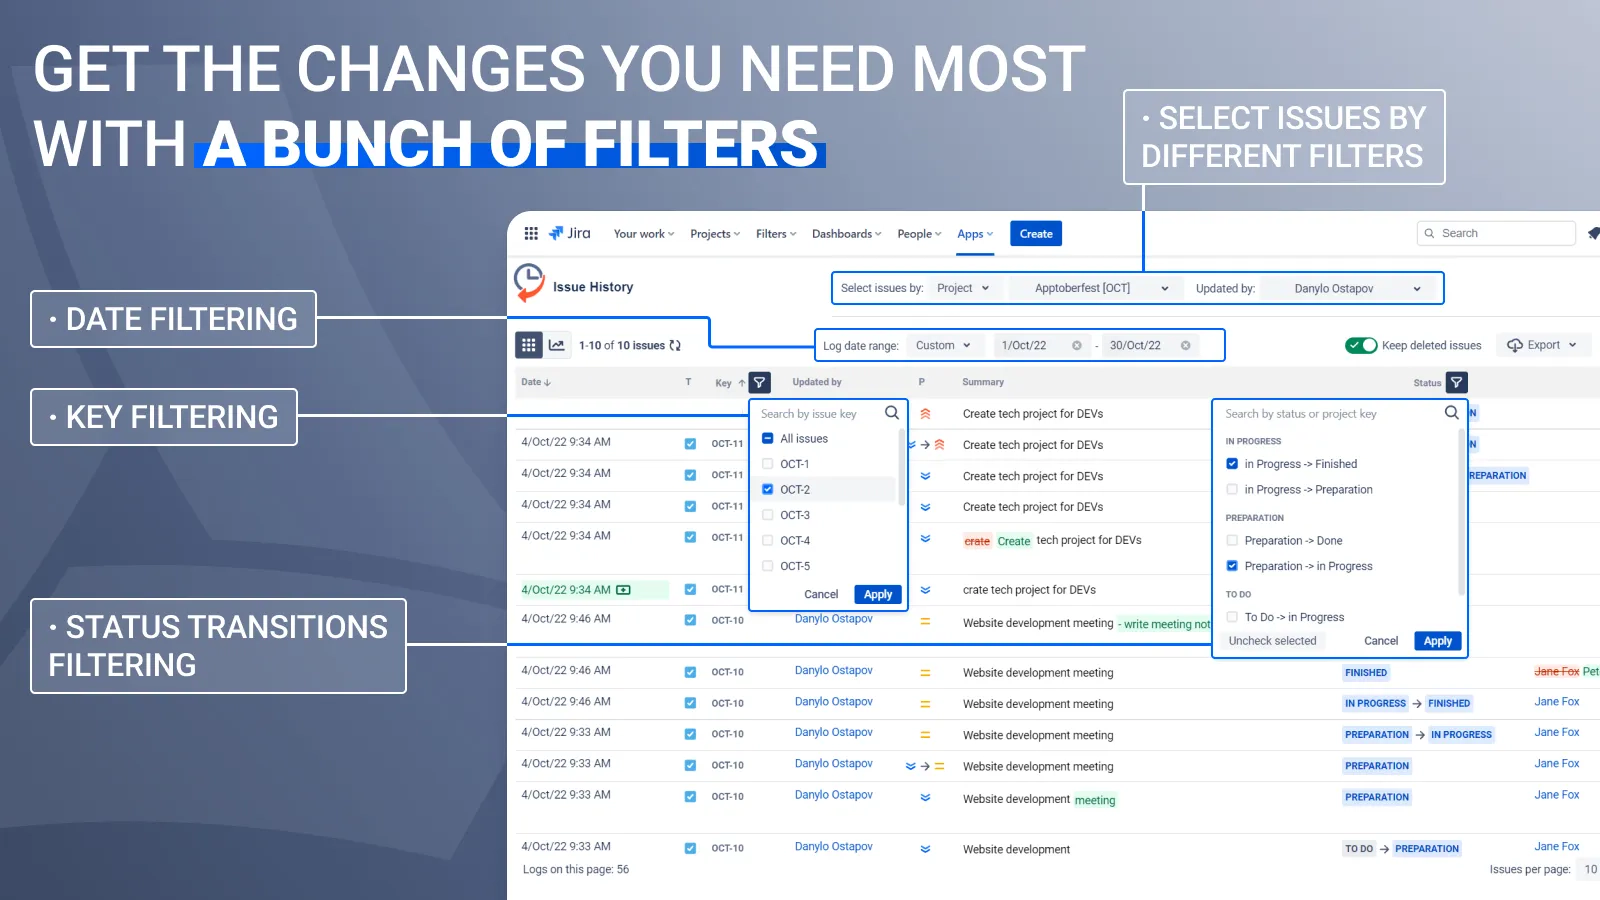 Get the changes you need most with a bunch of filters